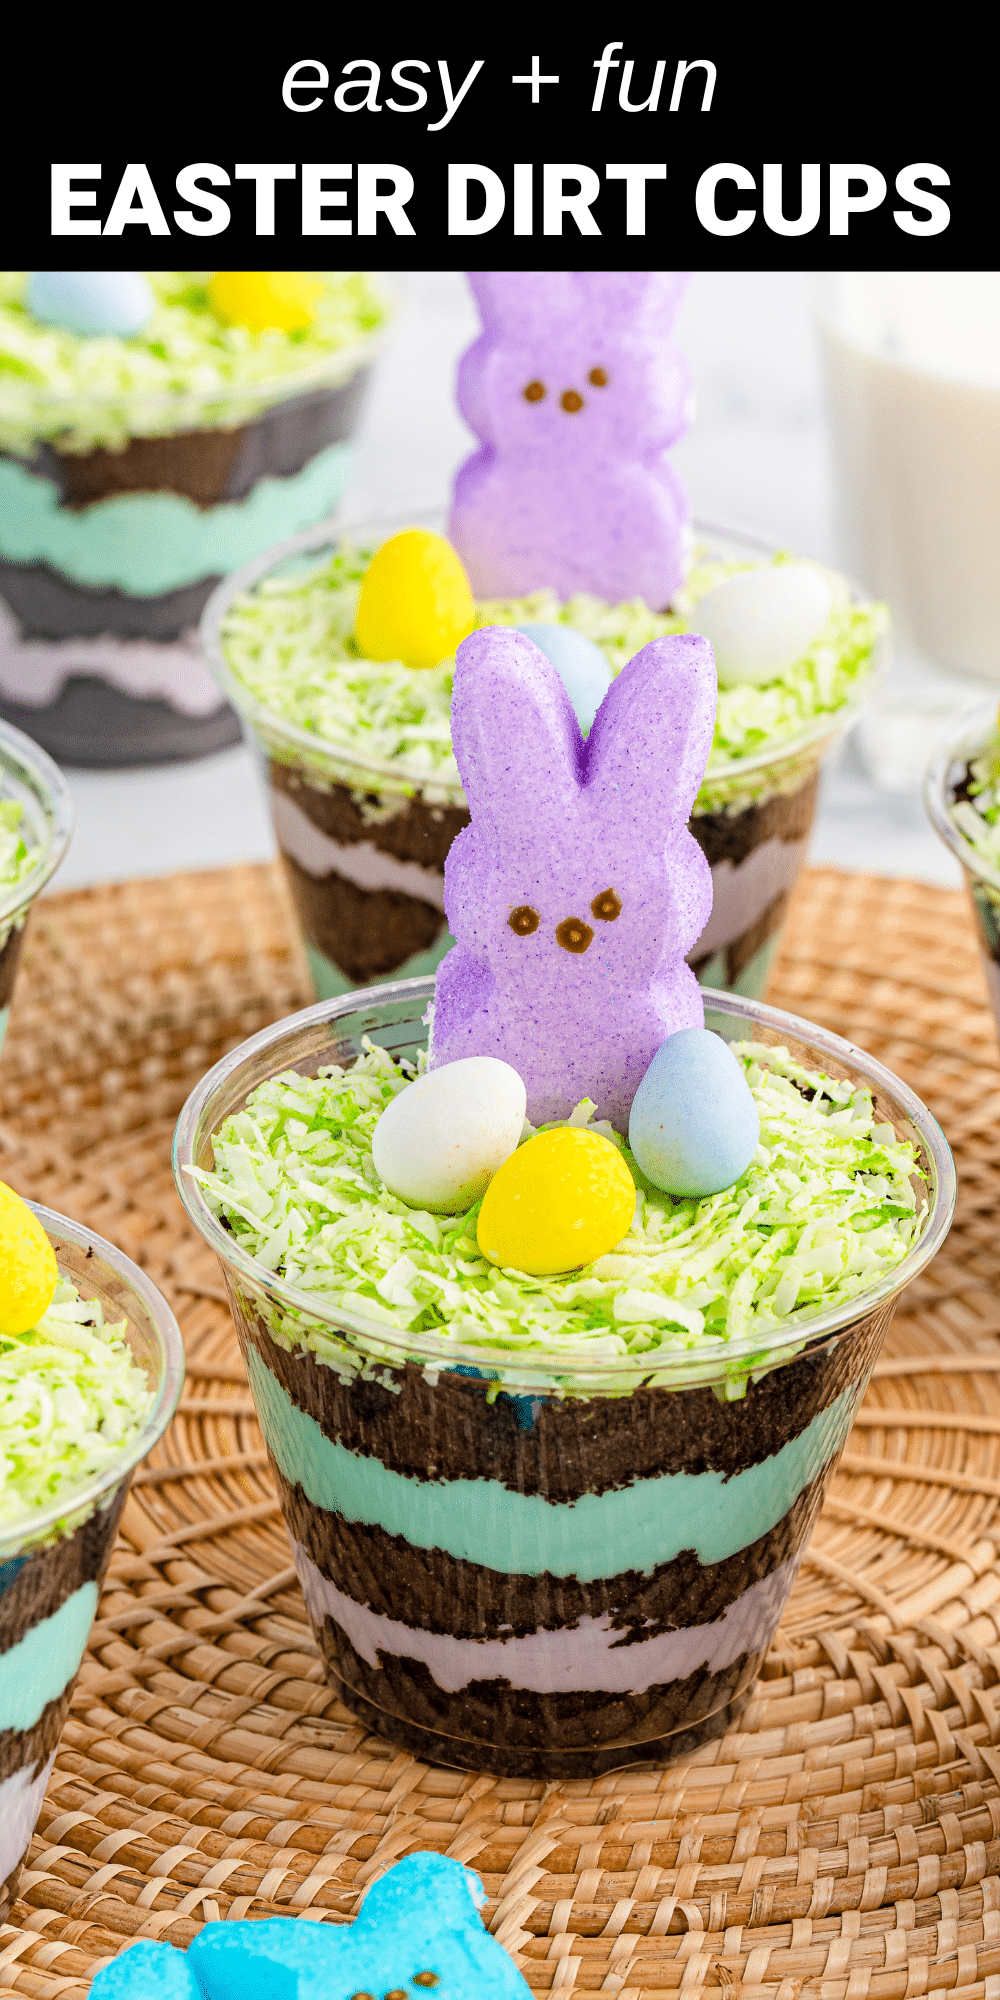 These Easter dessert cups are a festive dessert that’s so much fun to make. They’re an adorable and delicious treat that’s sure to be the star of your Easter brunch.